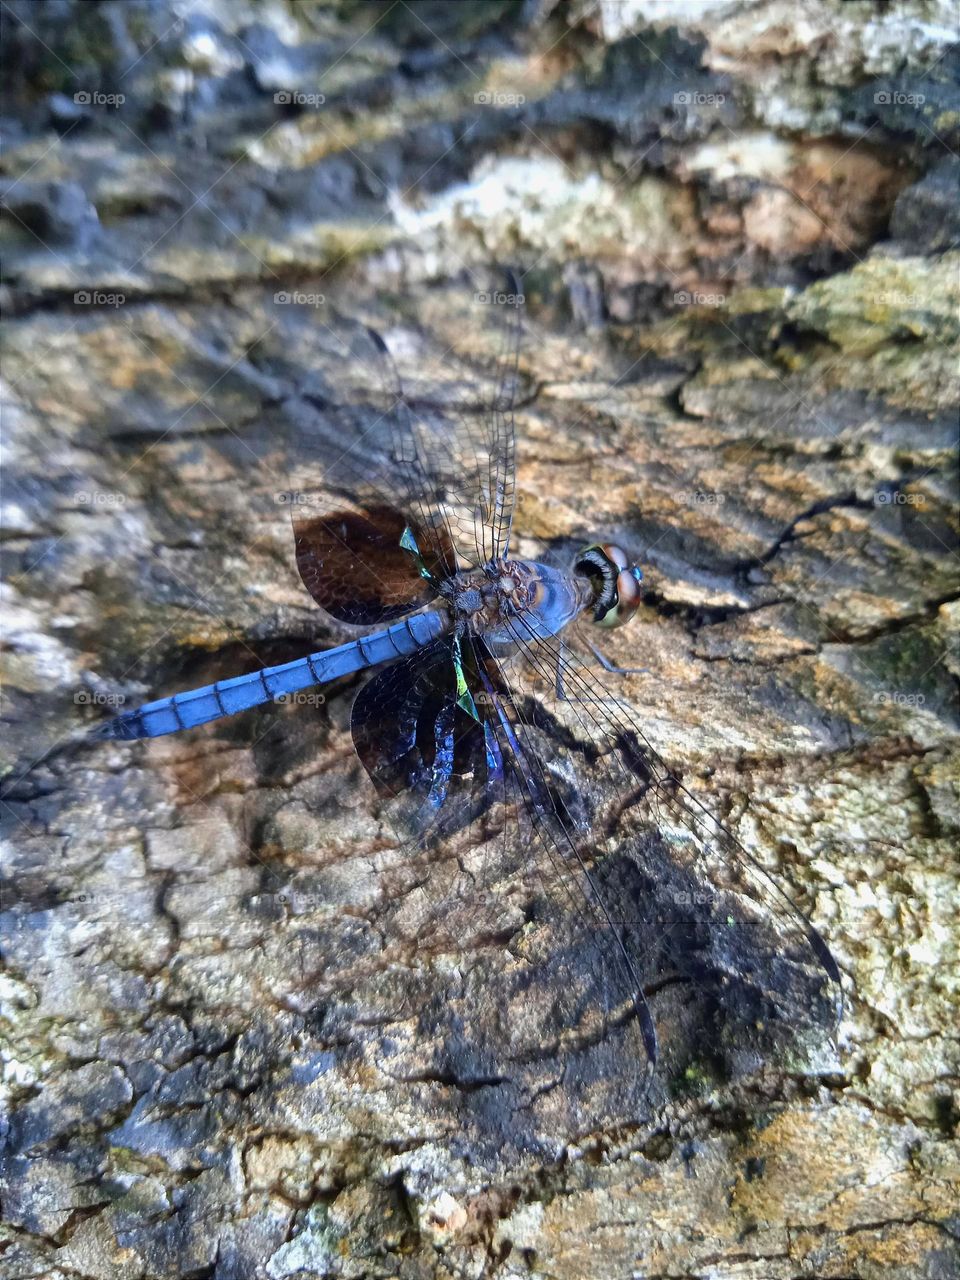 Blue dragonfly on the tree trunk.